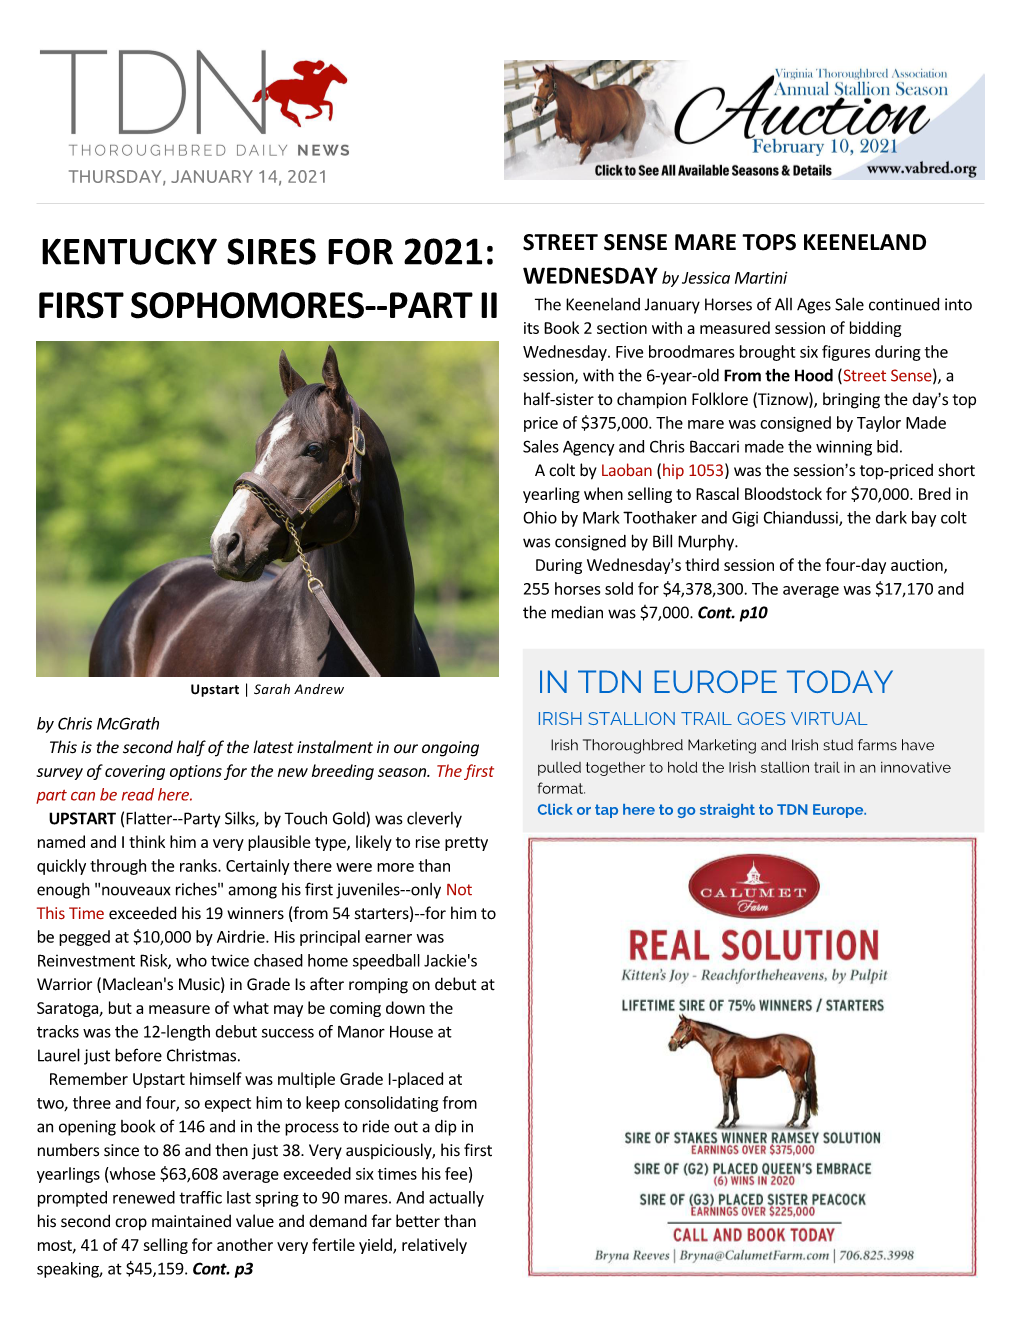 Kentucky Sires for 2021: First Sophomores--Part Ii